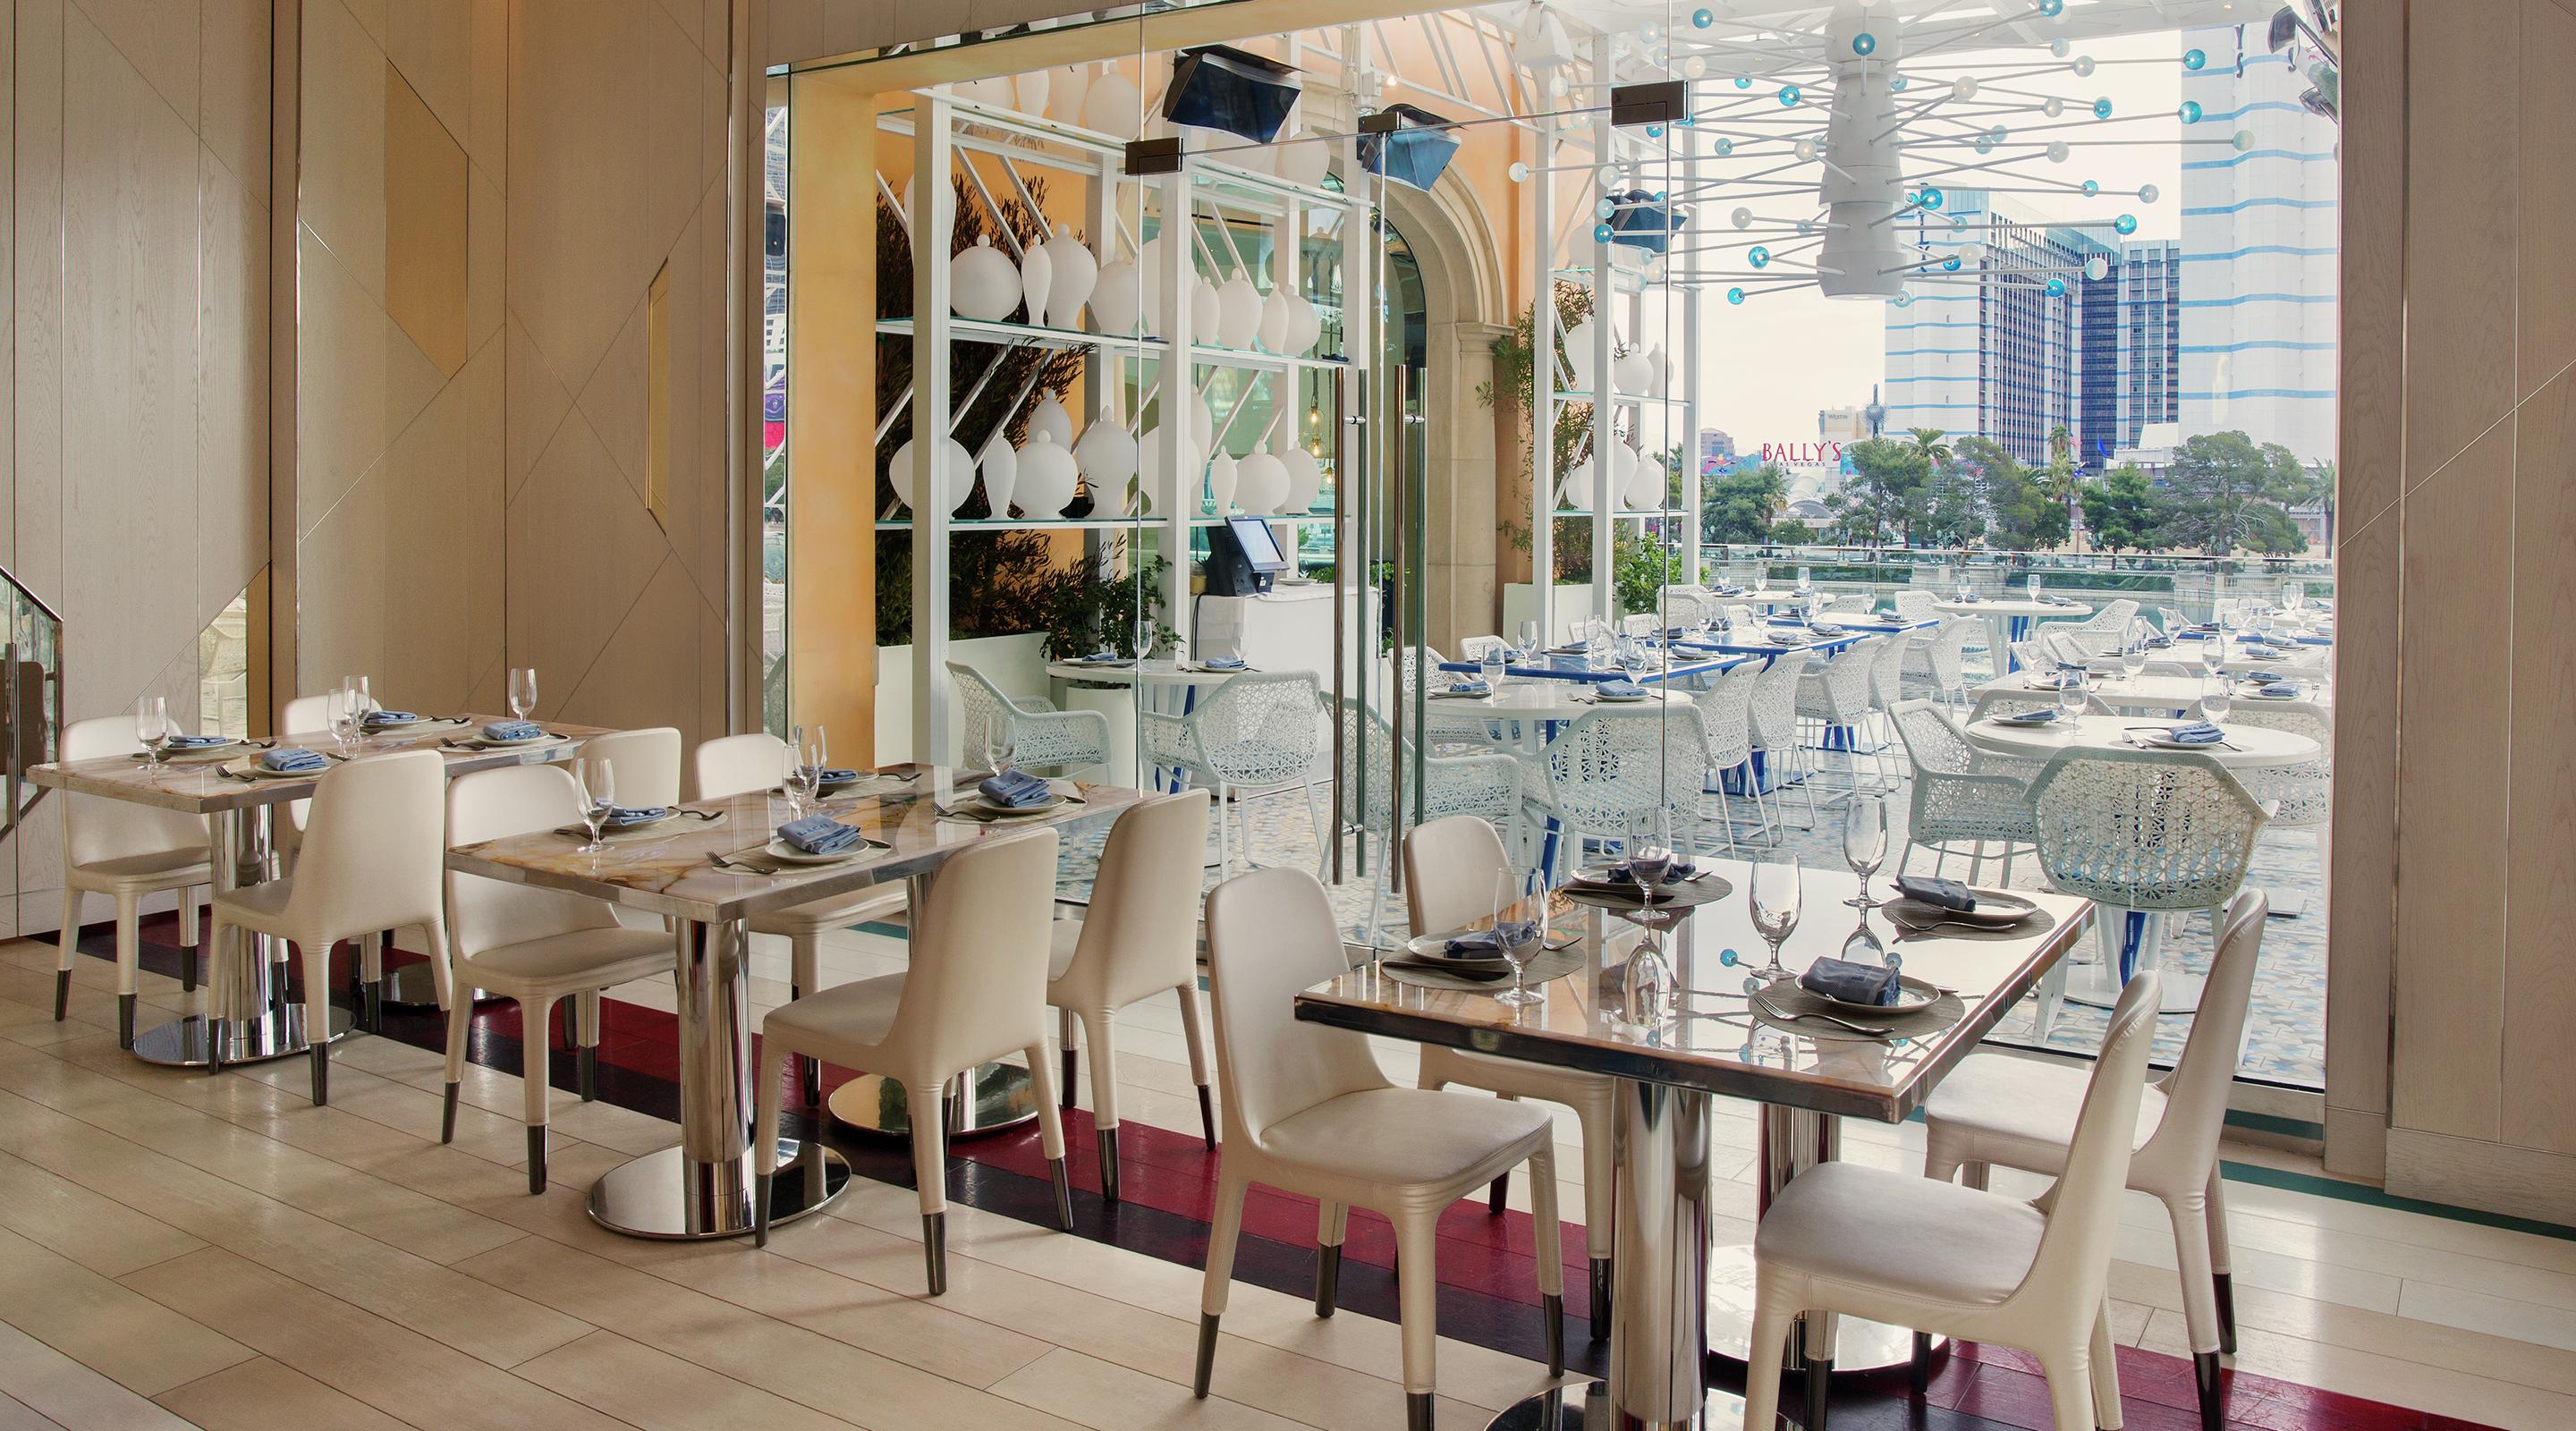 Reserve your private dining room at Lago.